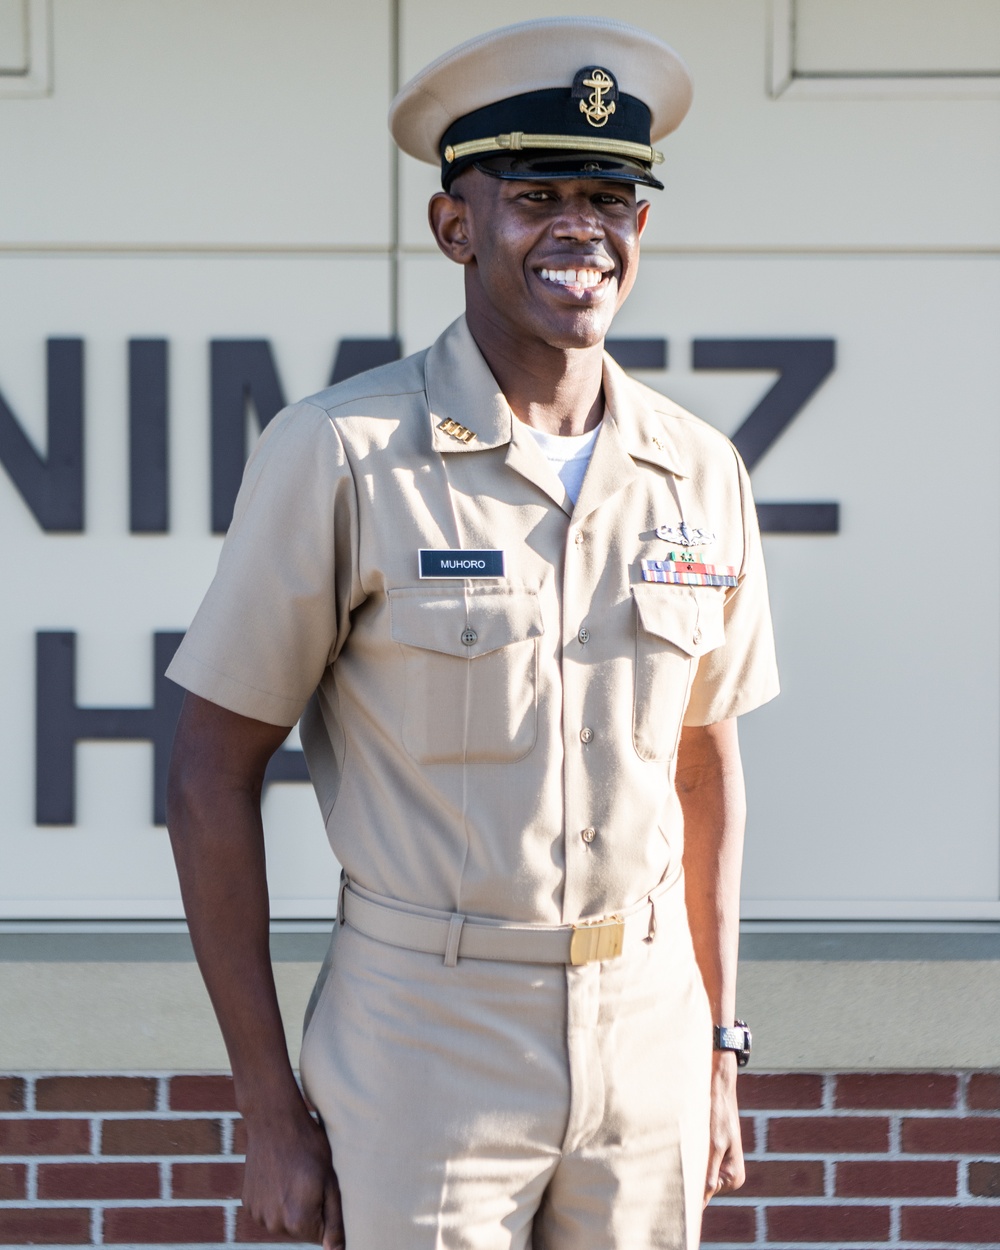 201211-N-TE695-0002 NEWPORT, R.I. (Dec. 11, 2020) Kenyan-born enlisted Sailor earns commission at Officer Candidate School